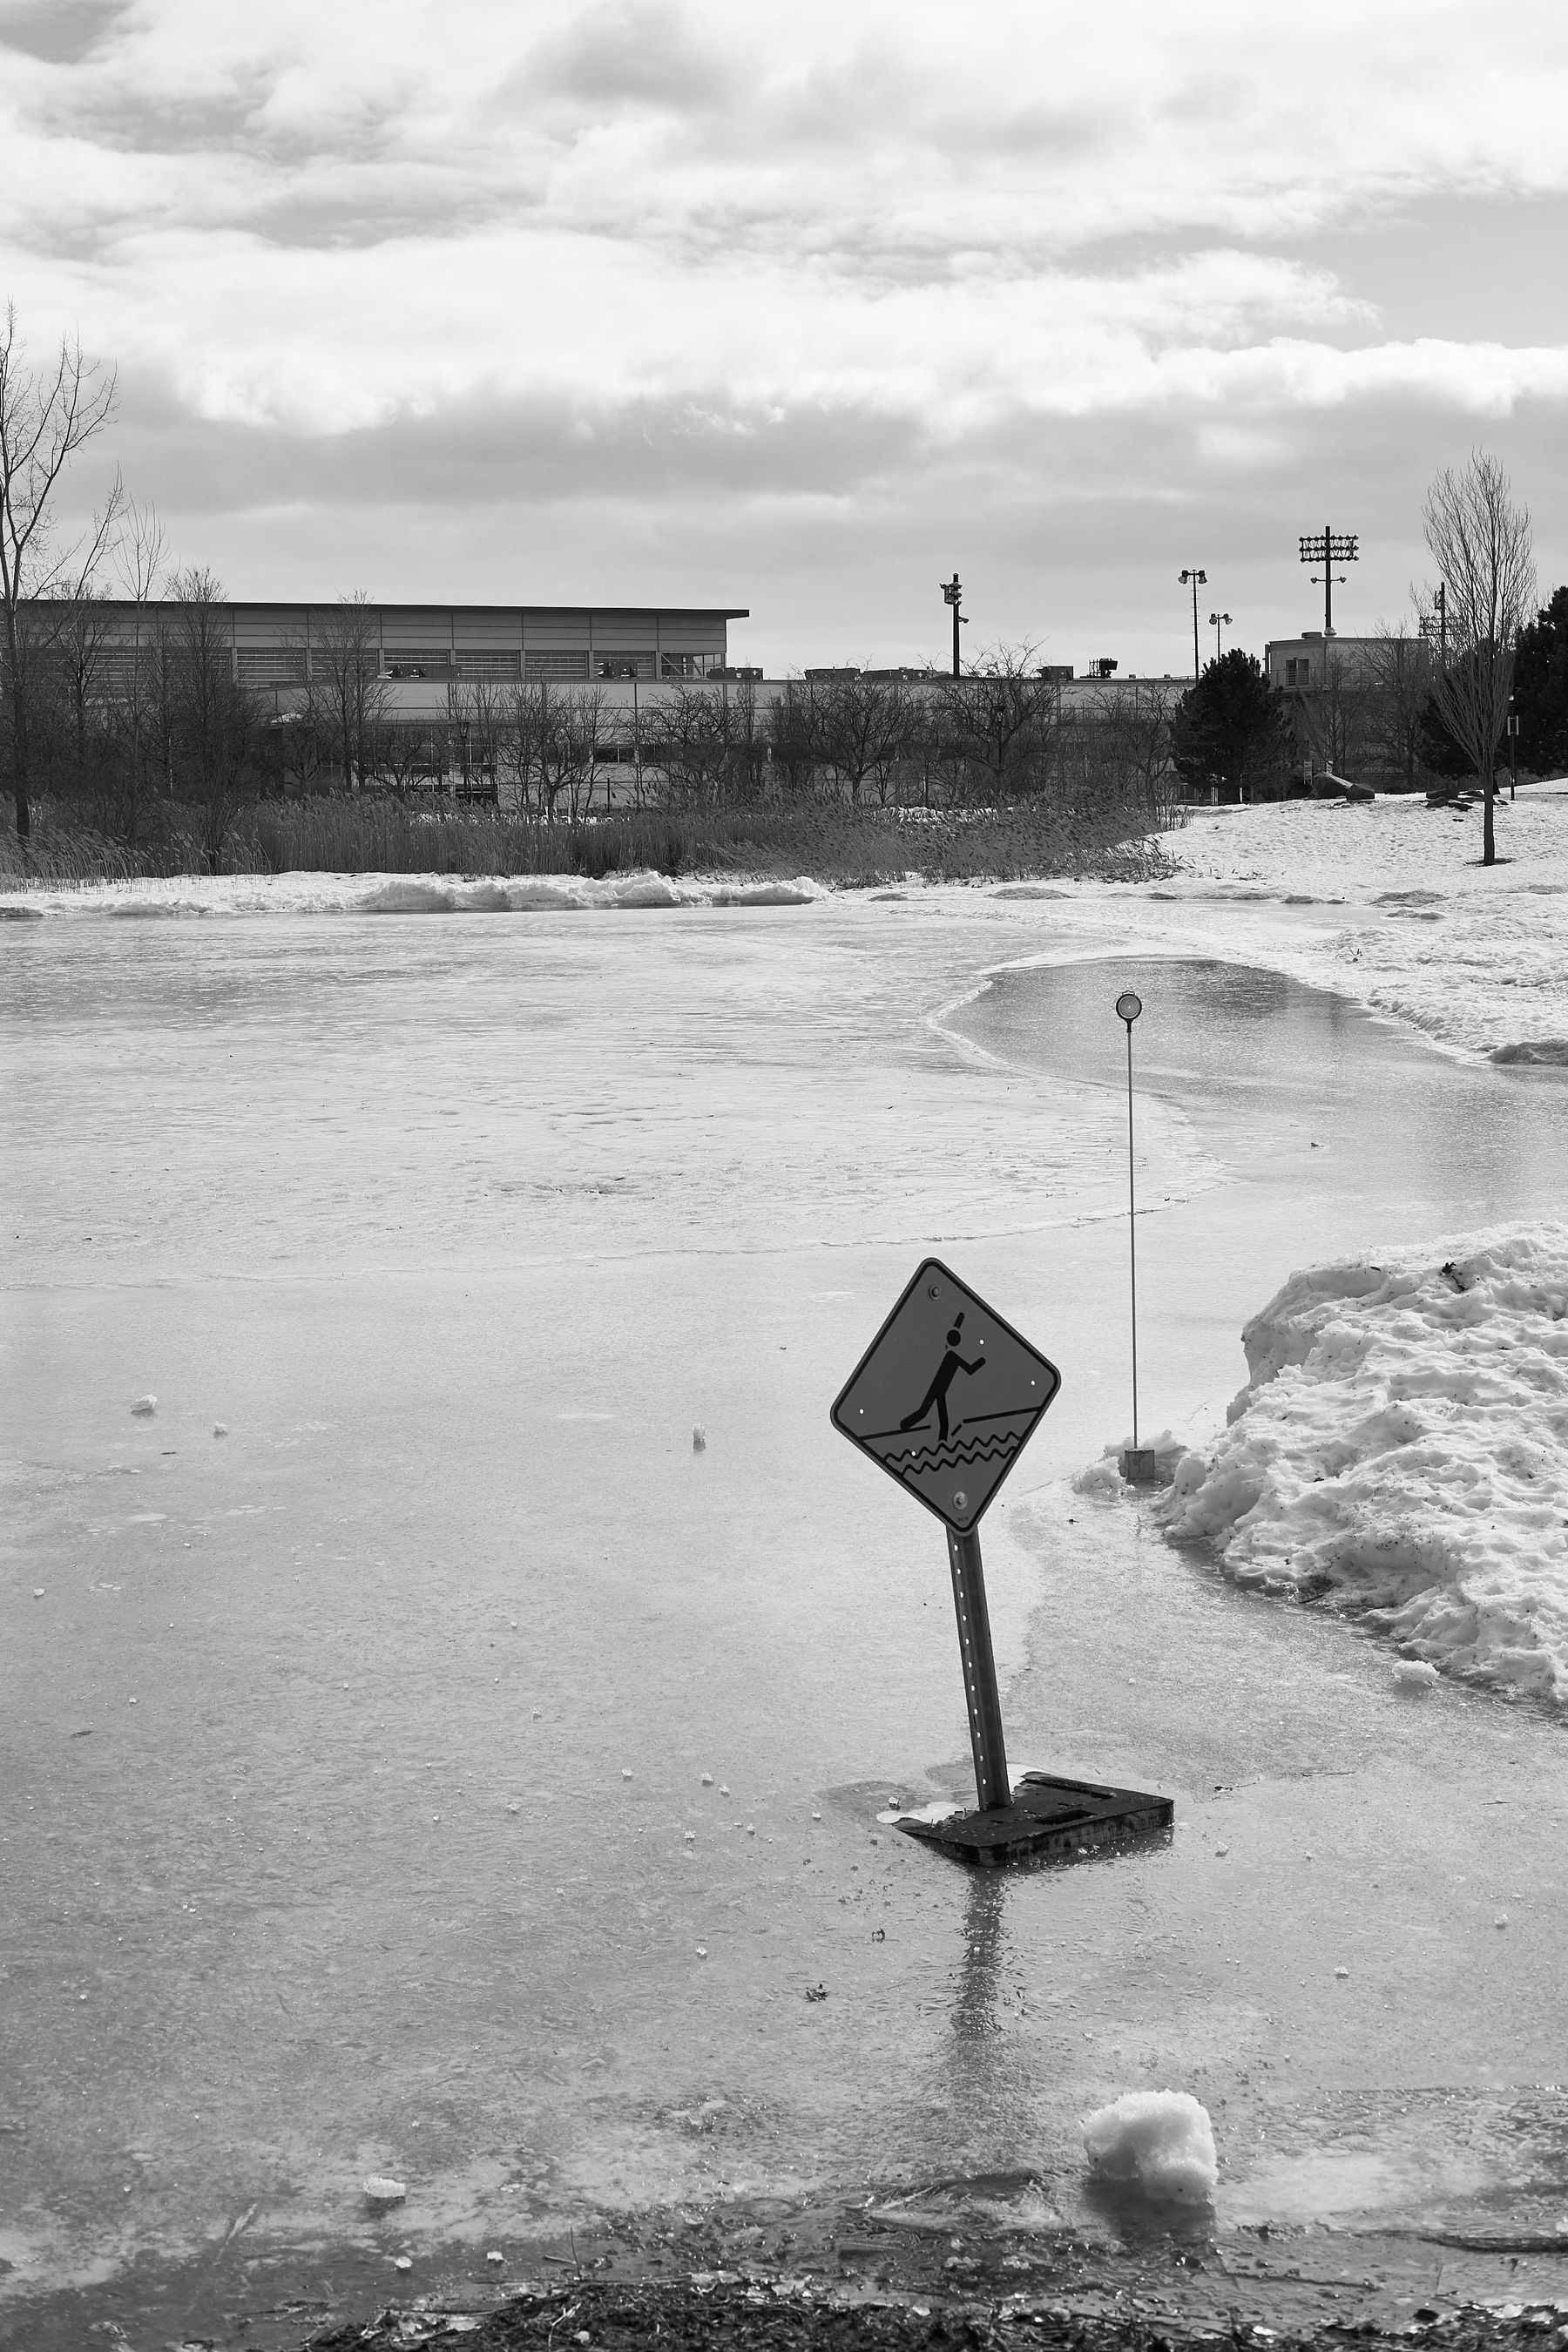 The ice has a warning sign on it. It is thin.